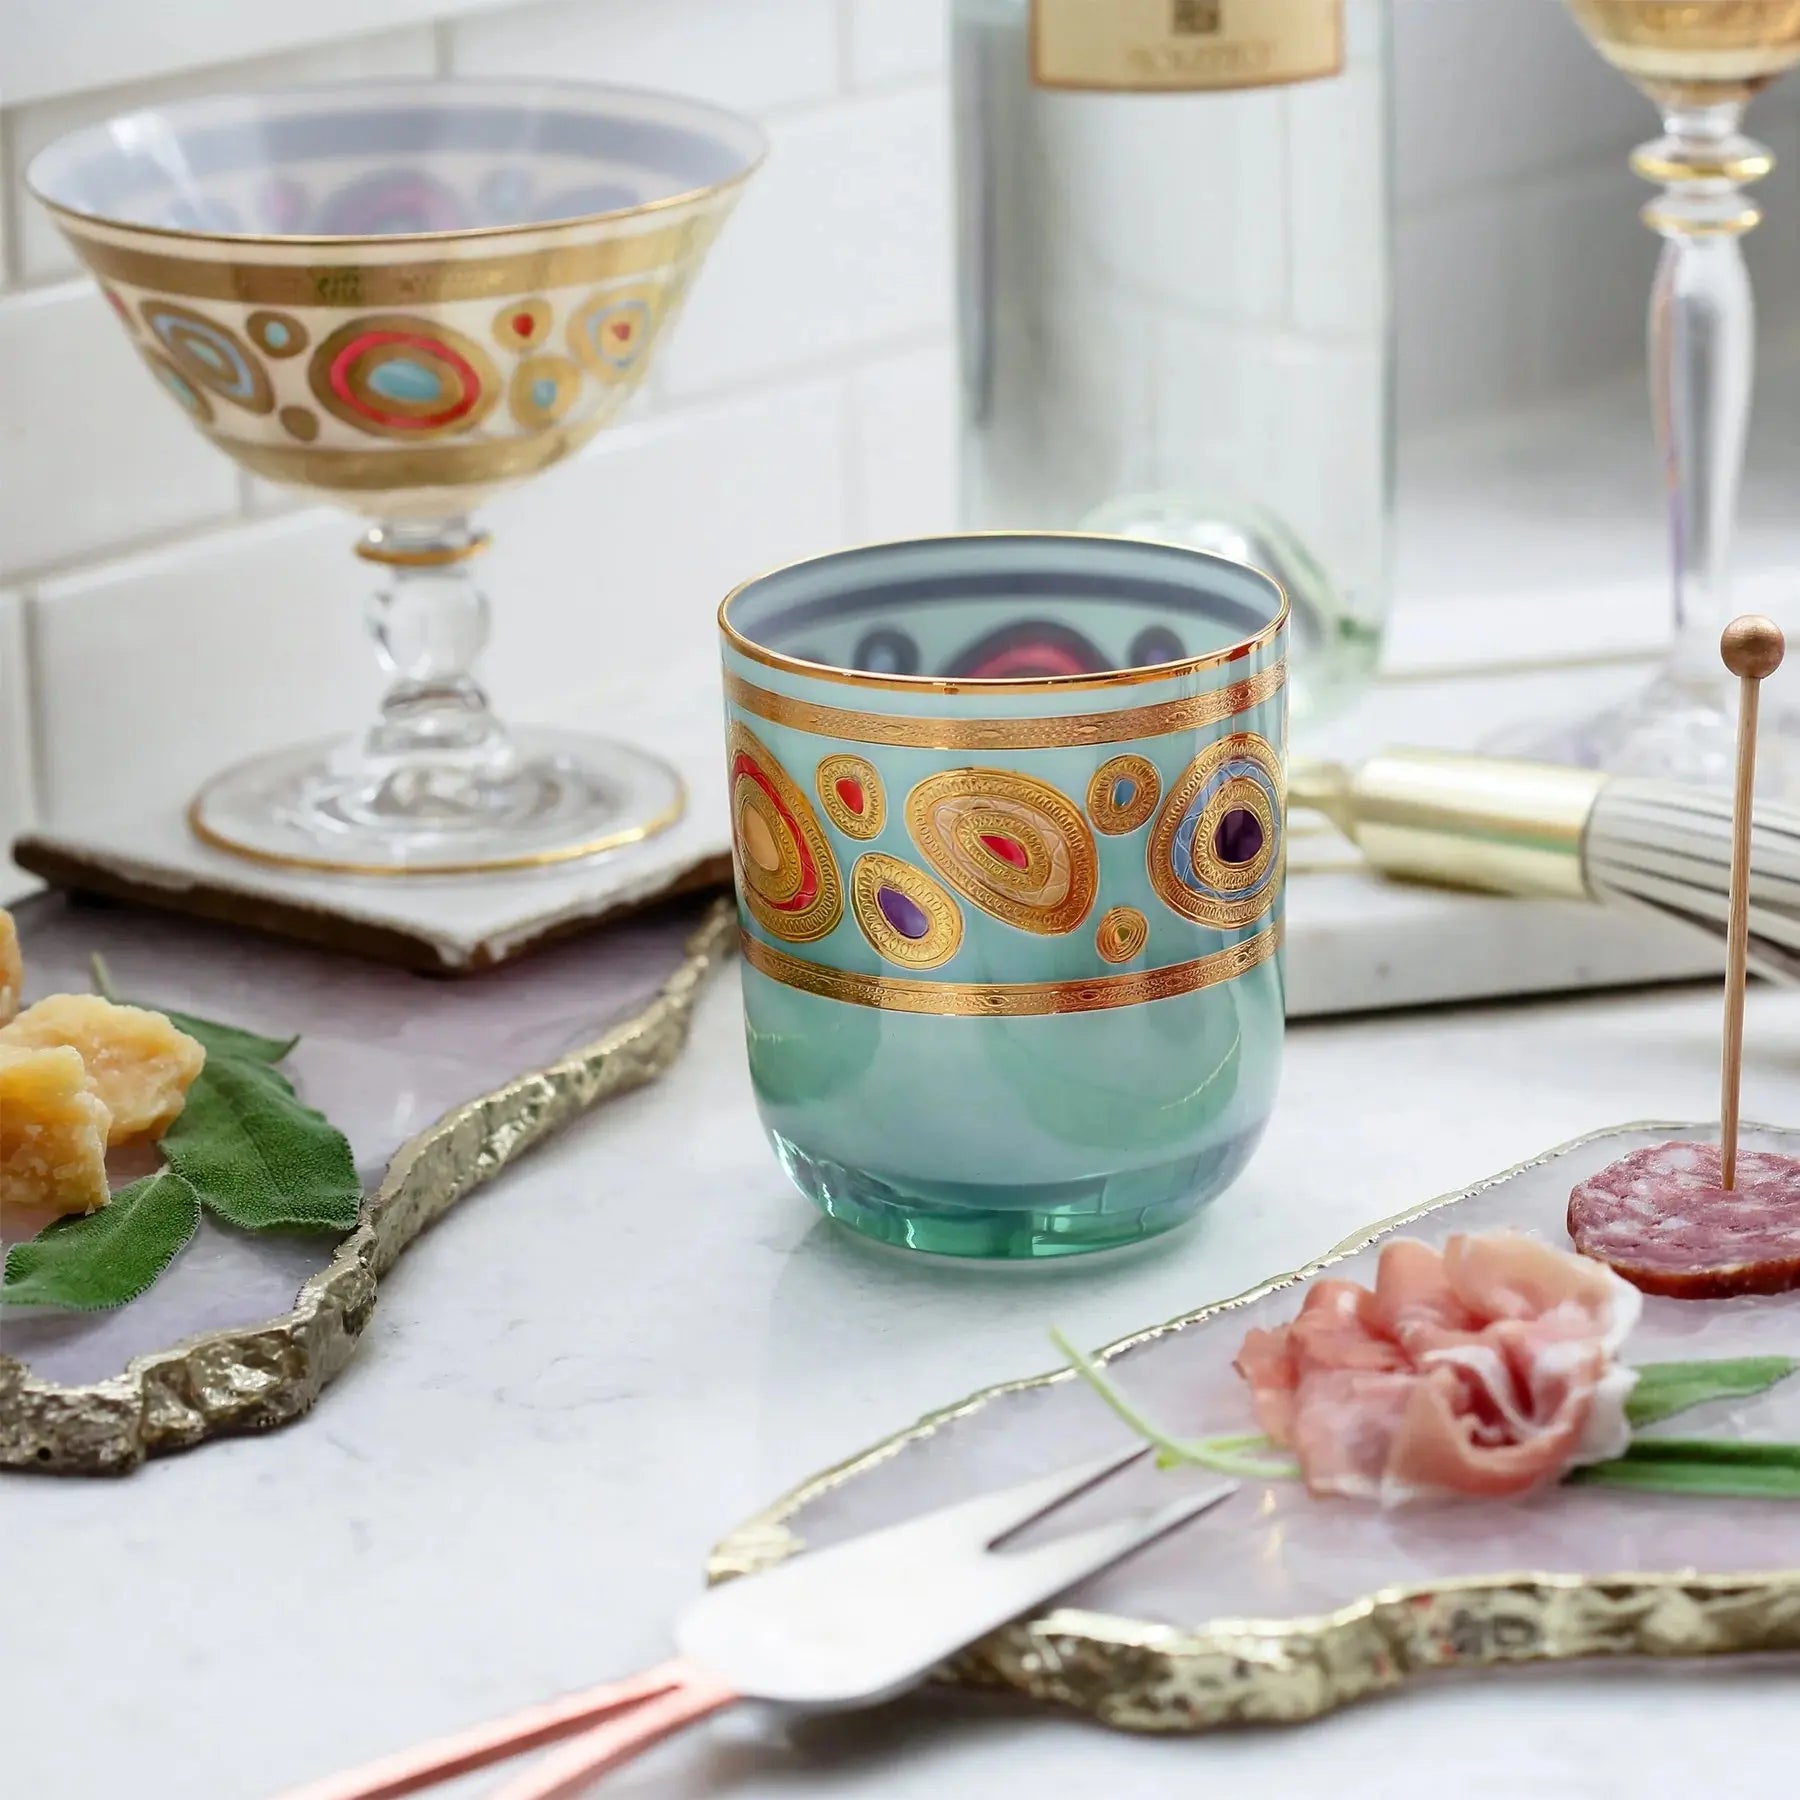 Vietri Regalia Double Old Fashioned Glass in Aqua on a kitchen counter with food and decorative items